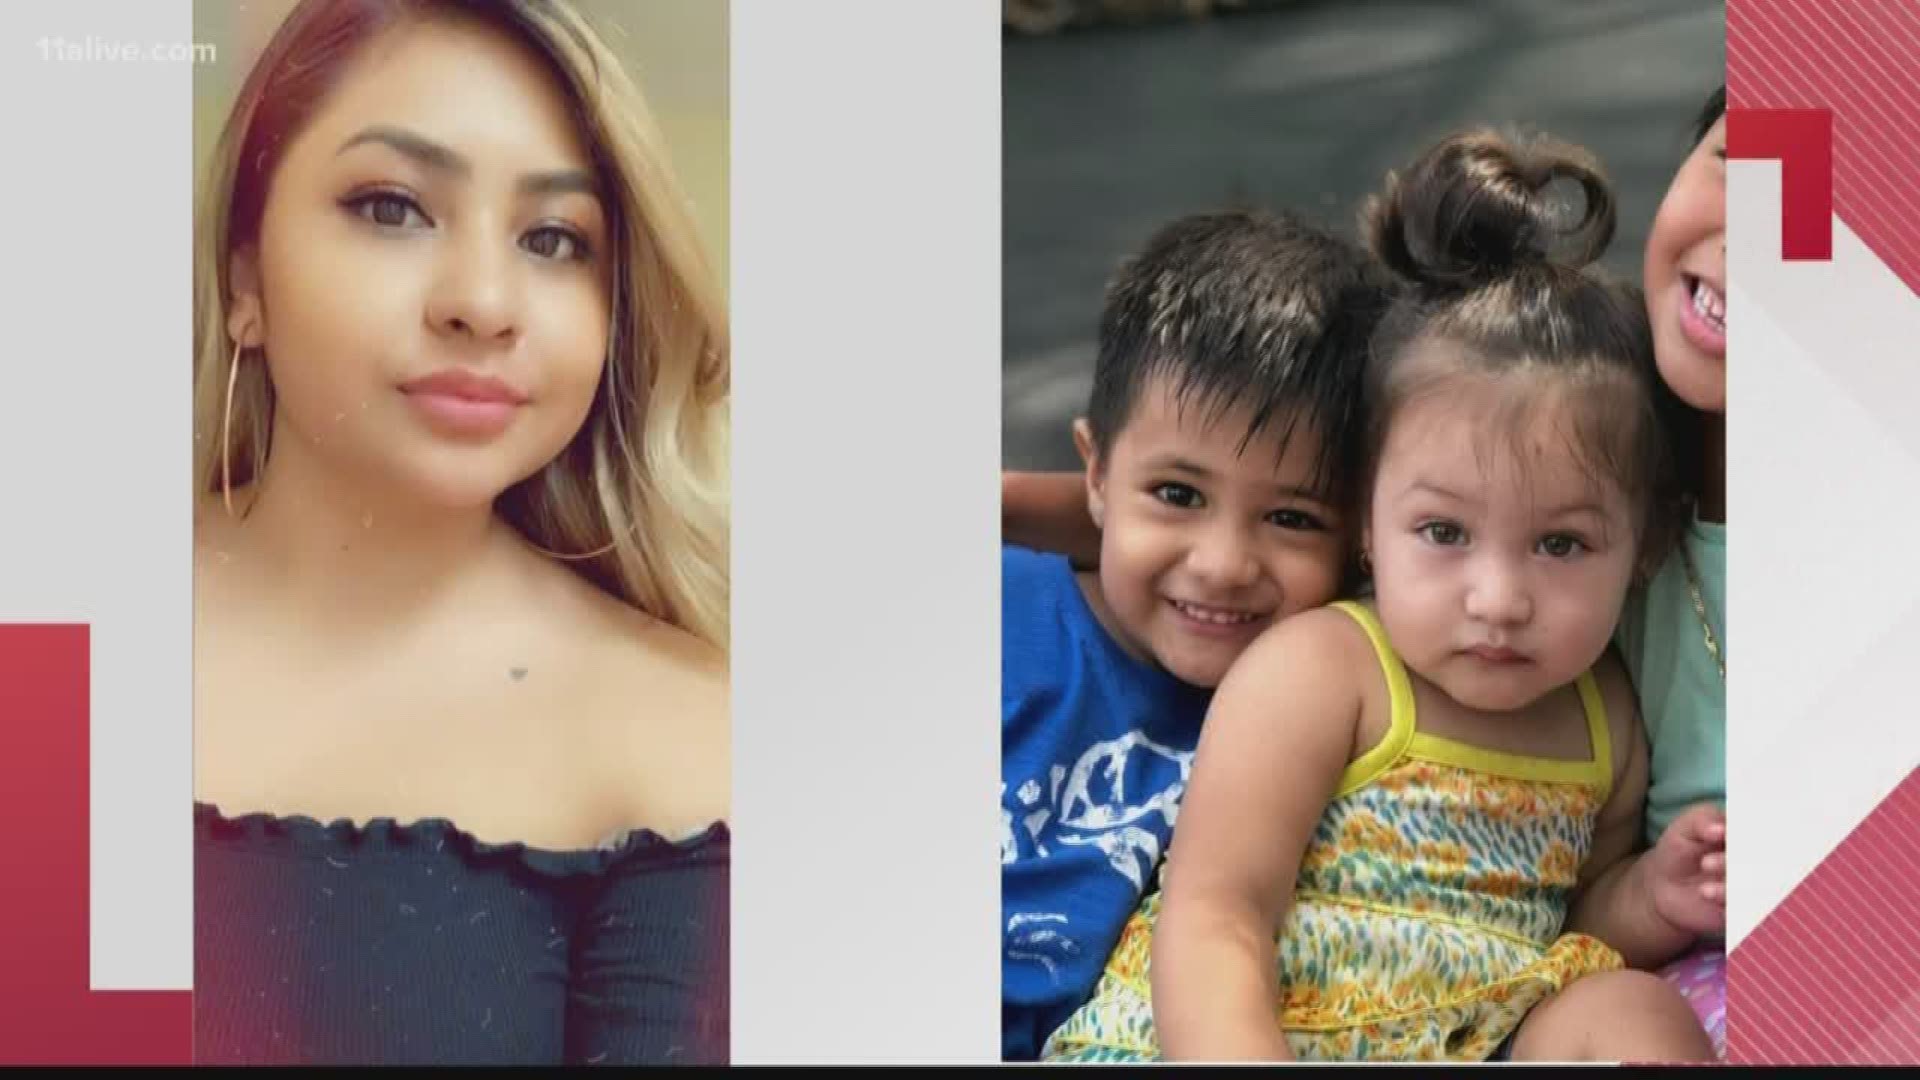 Powder Springs Police said Scarlet and Kael Lira, ages 1 and 2, along with their mother, 23-year-old Yajaira Lira Ramirez, were able to get away from their abductor